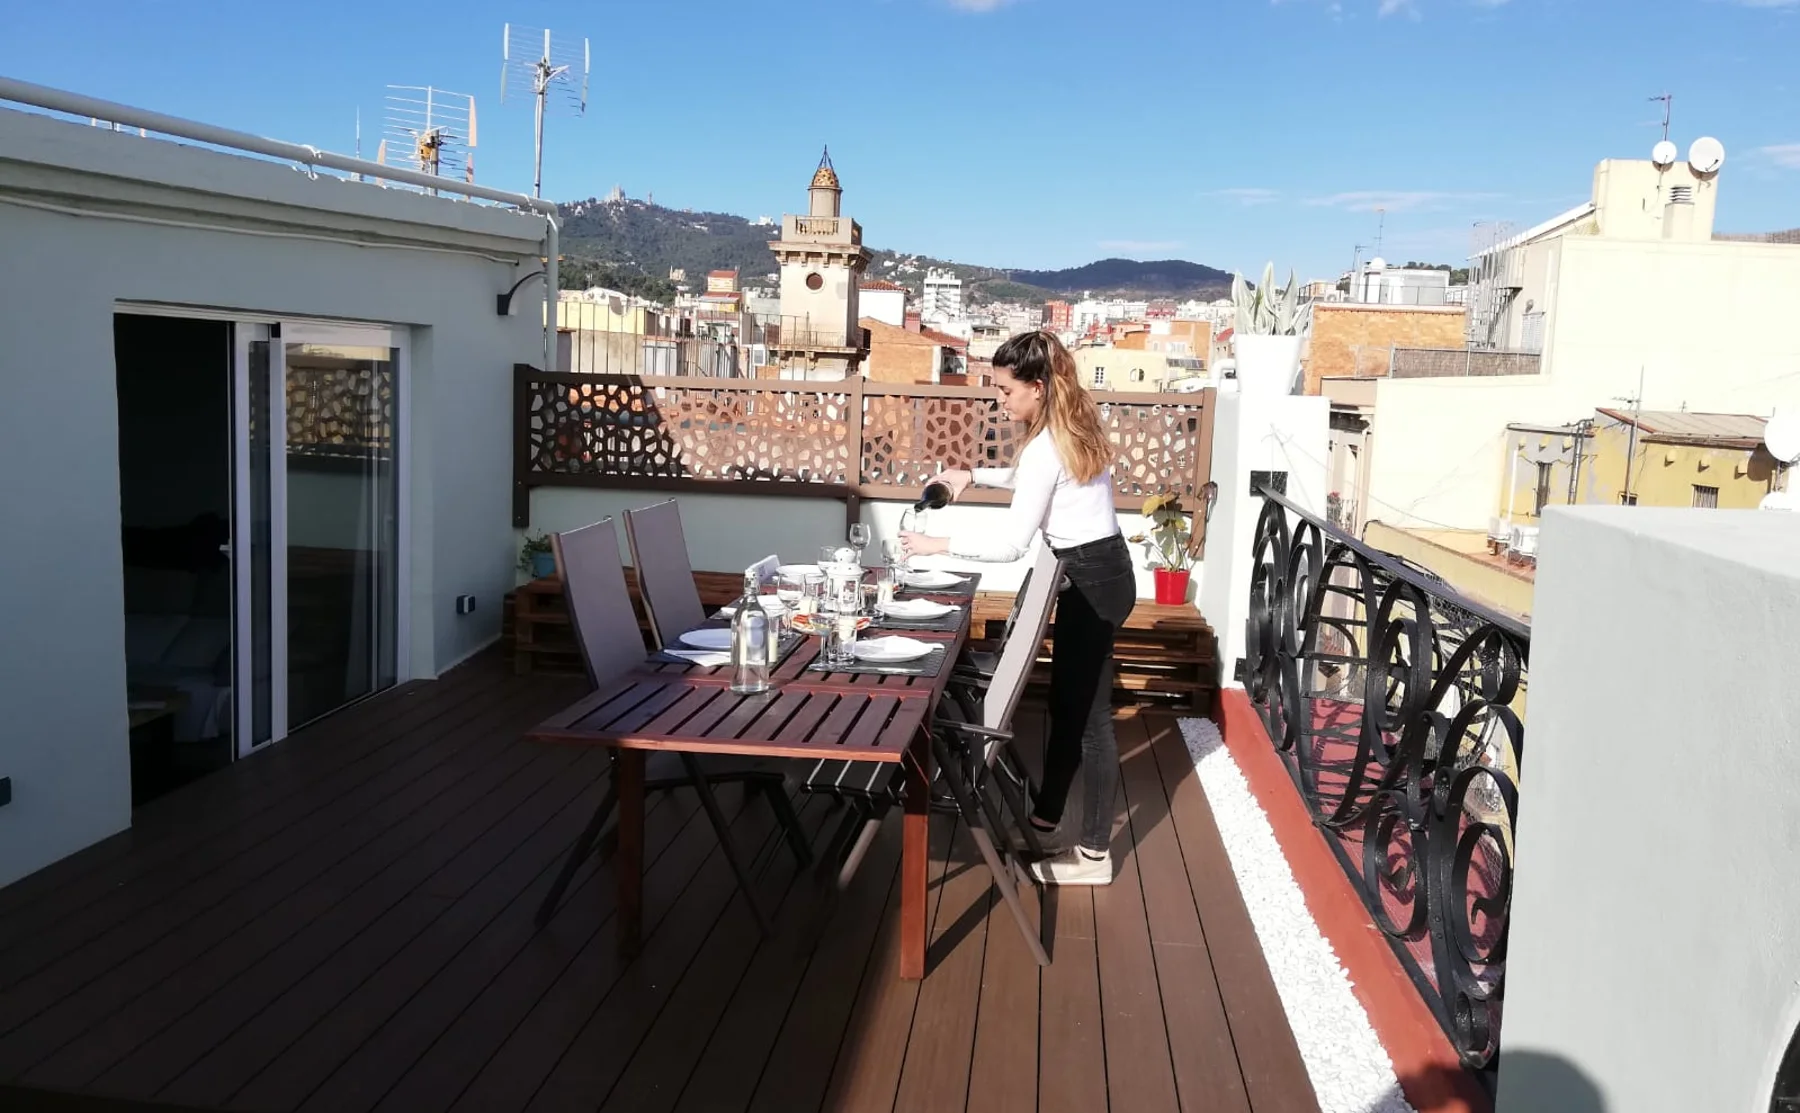 Paella showcooking on a rooftop with BCN views - 1364336